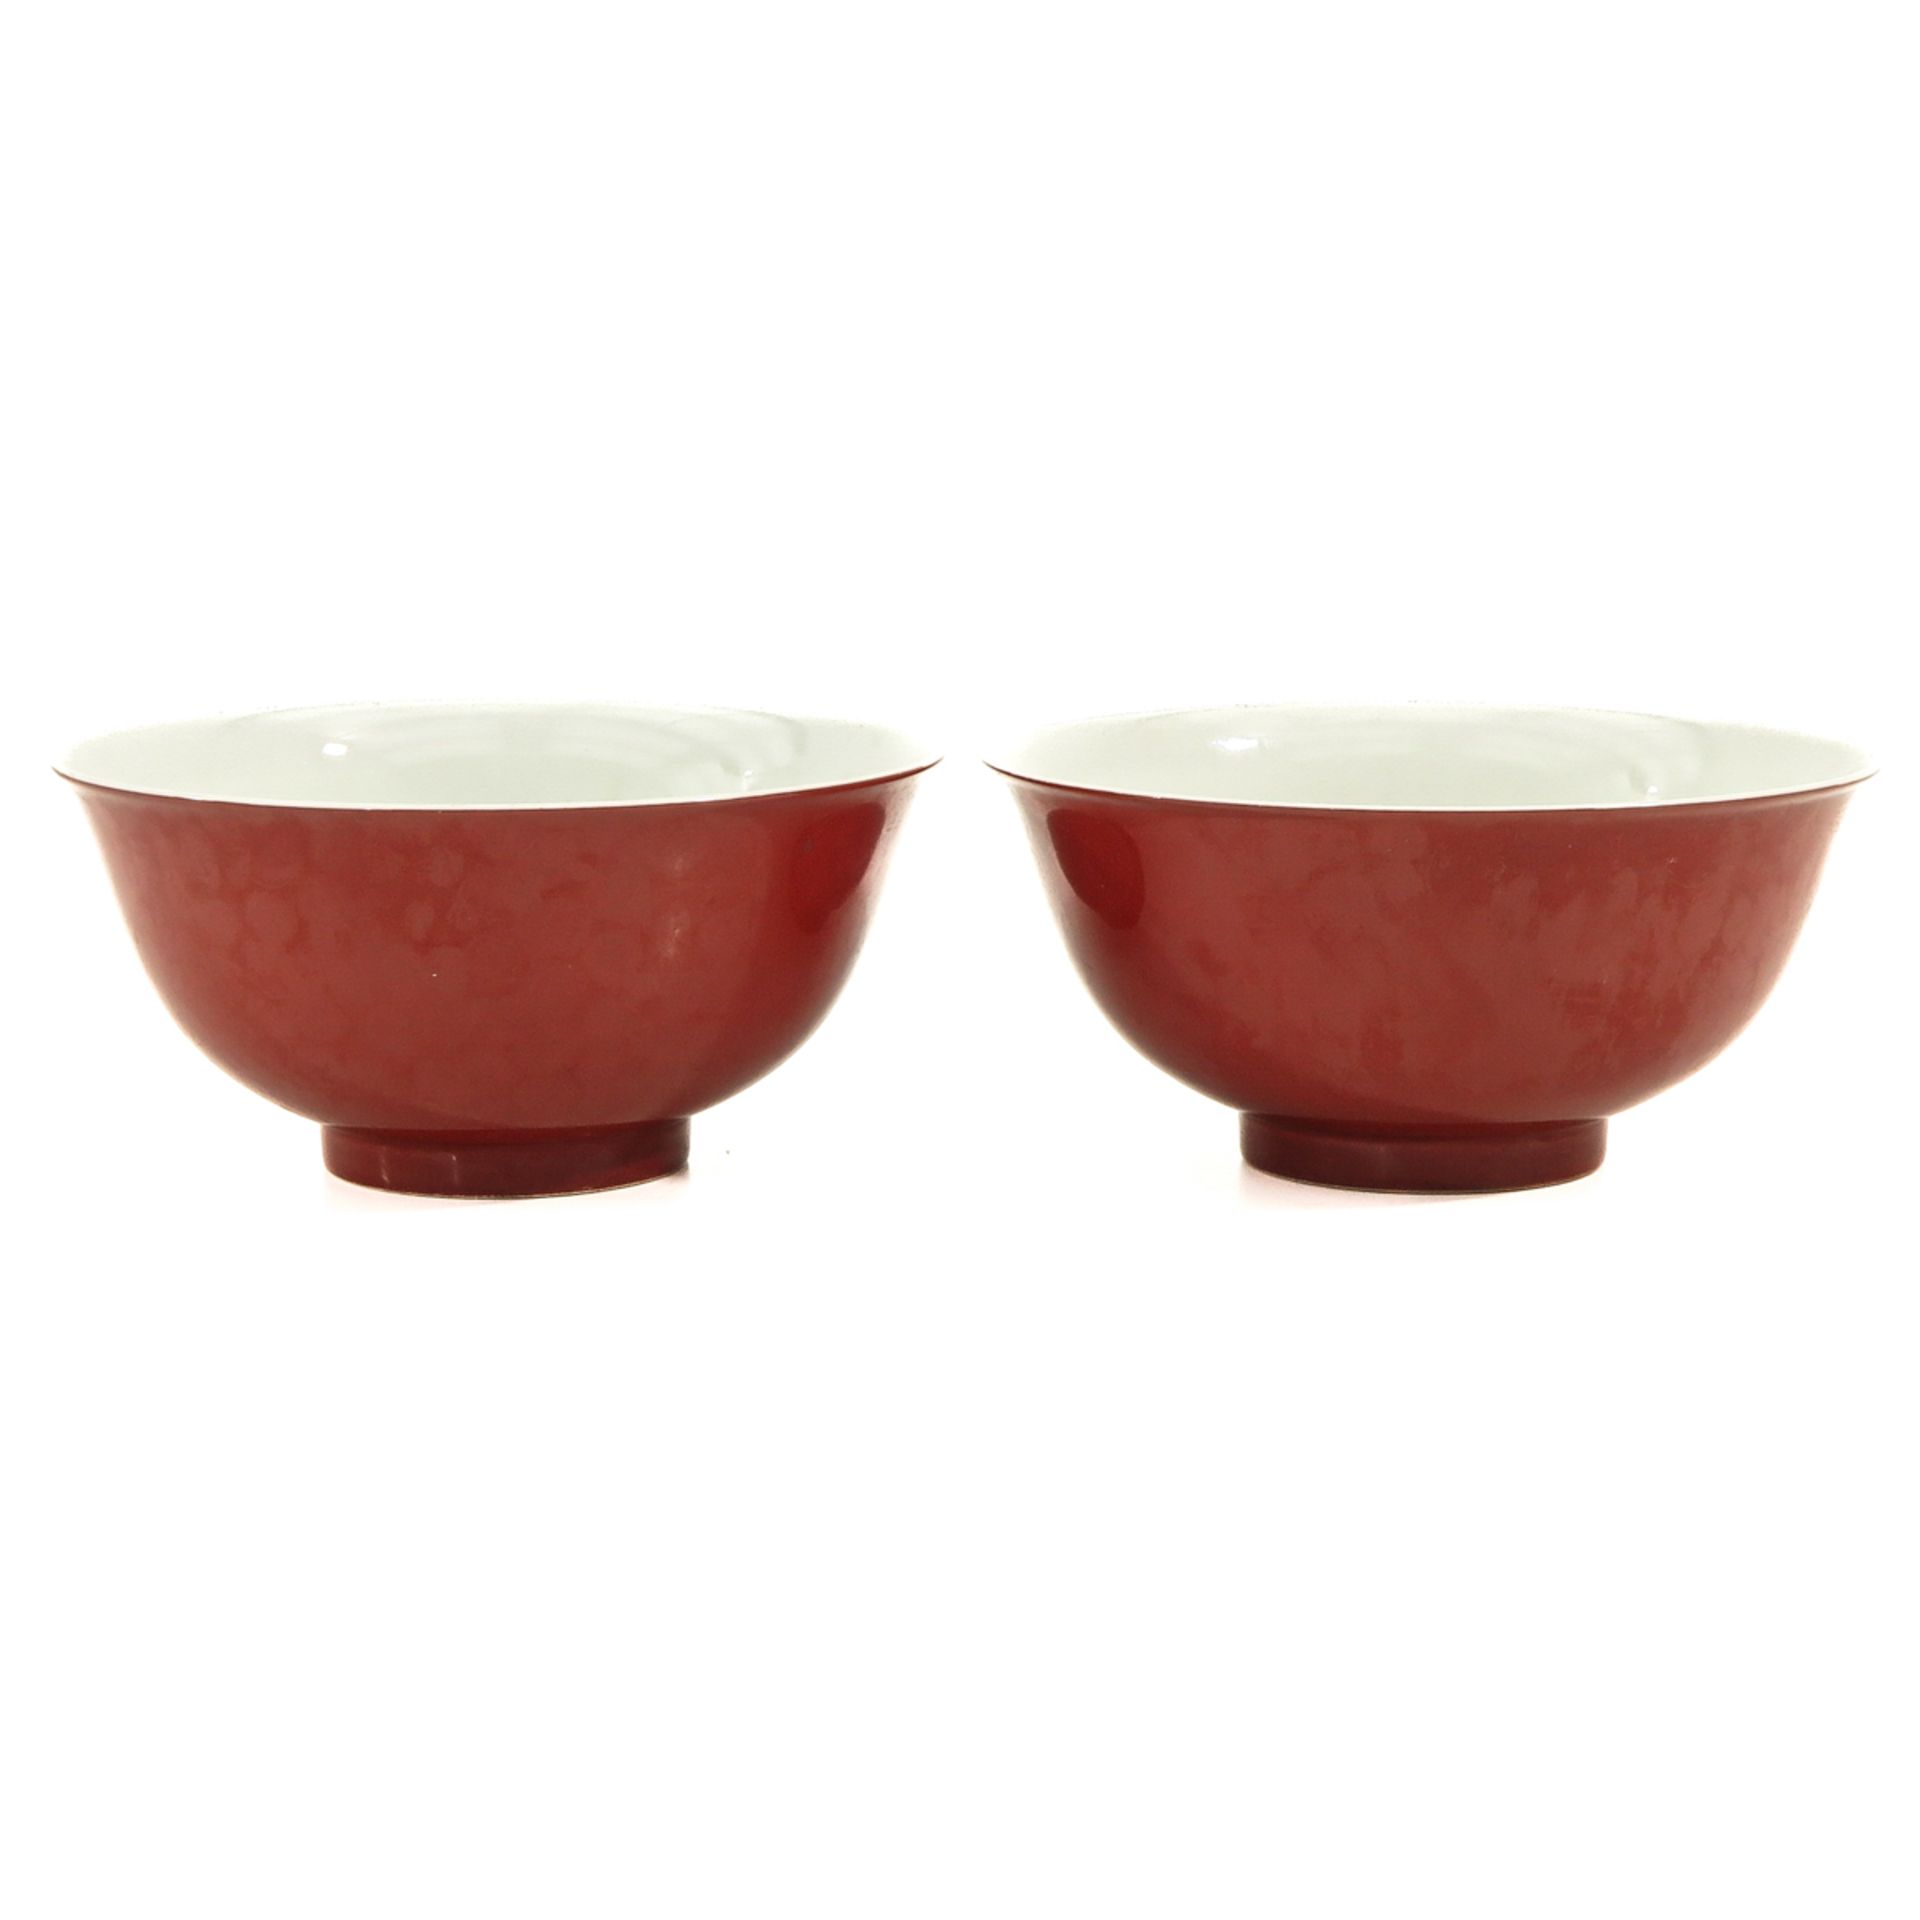 A Pair of Famille Rose Bowls